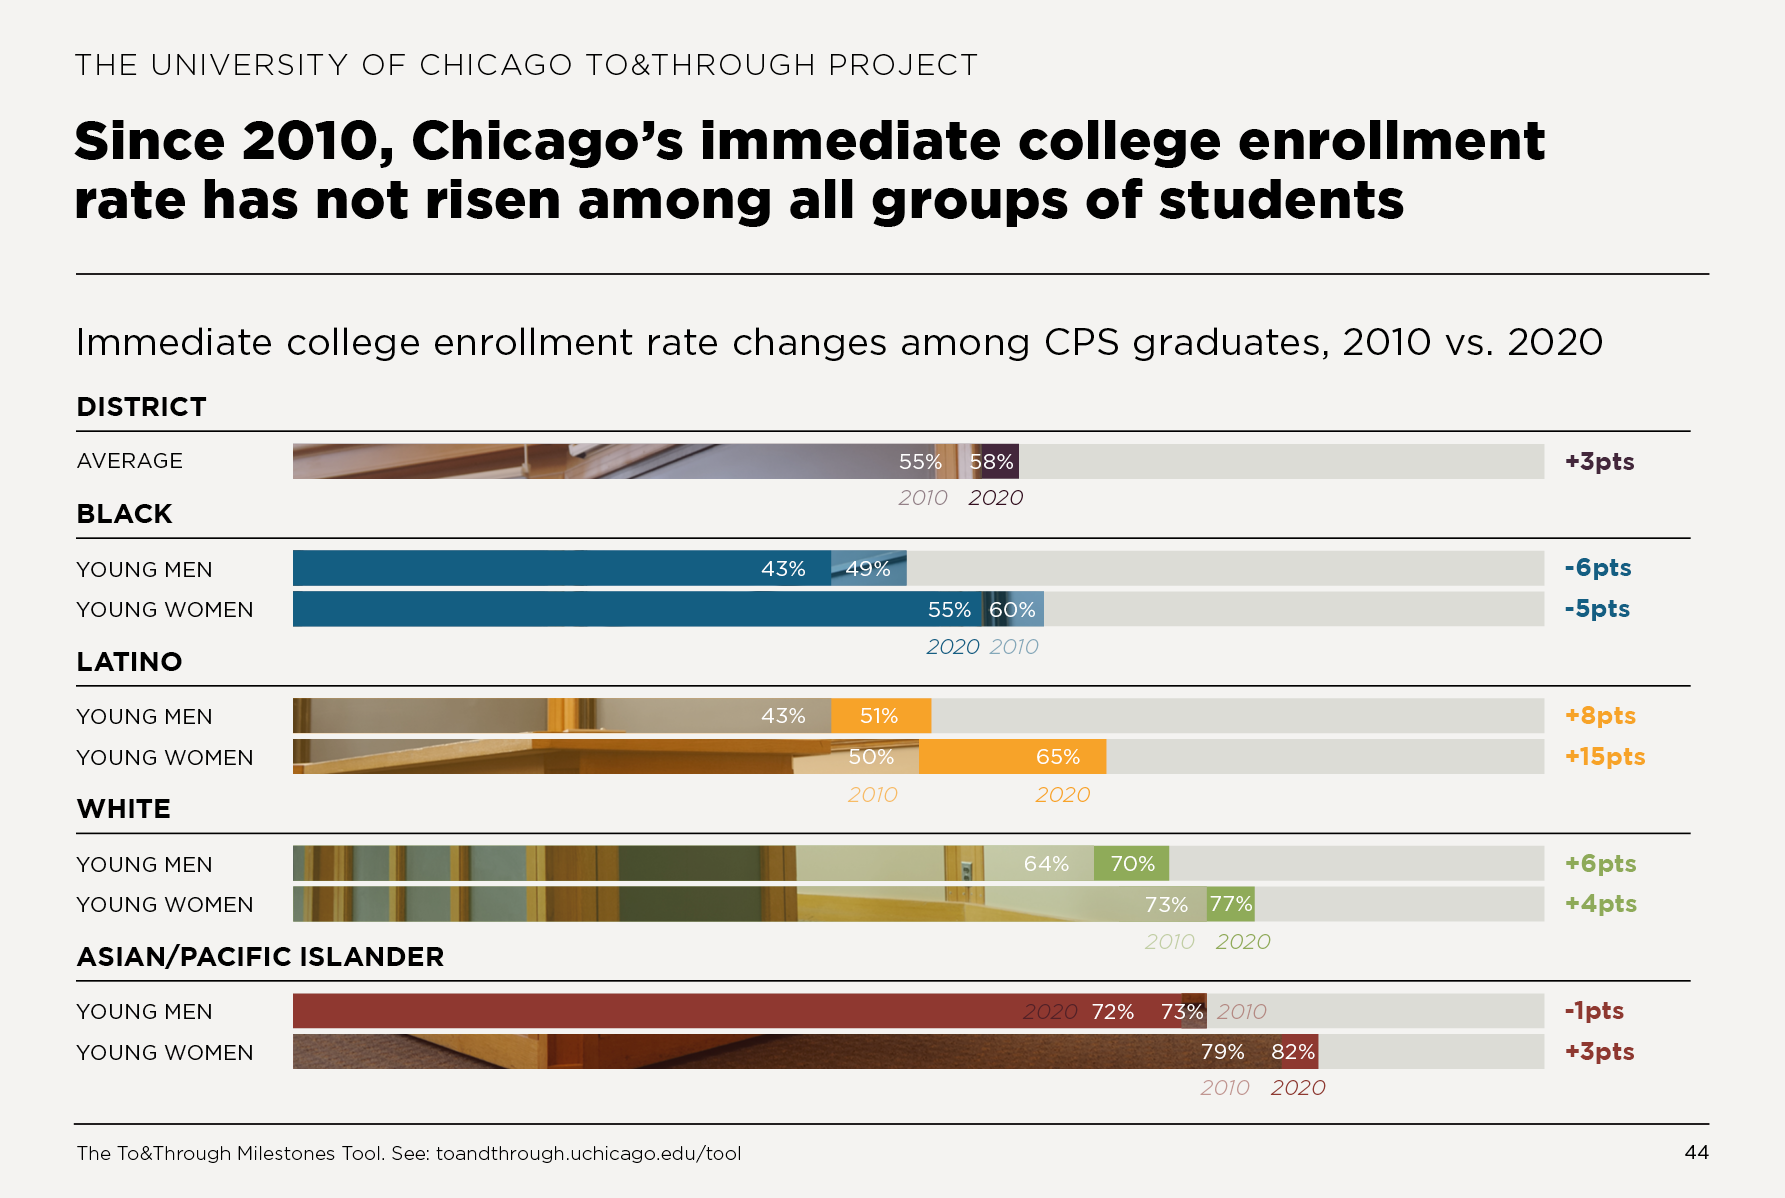 Since 2010, Chicago’s immediate college enrollment rate has not risen among all groups of students